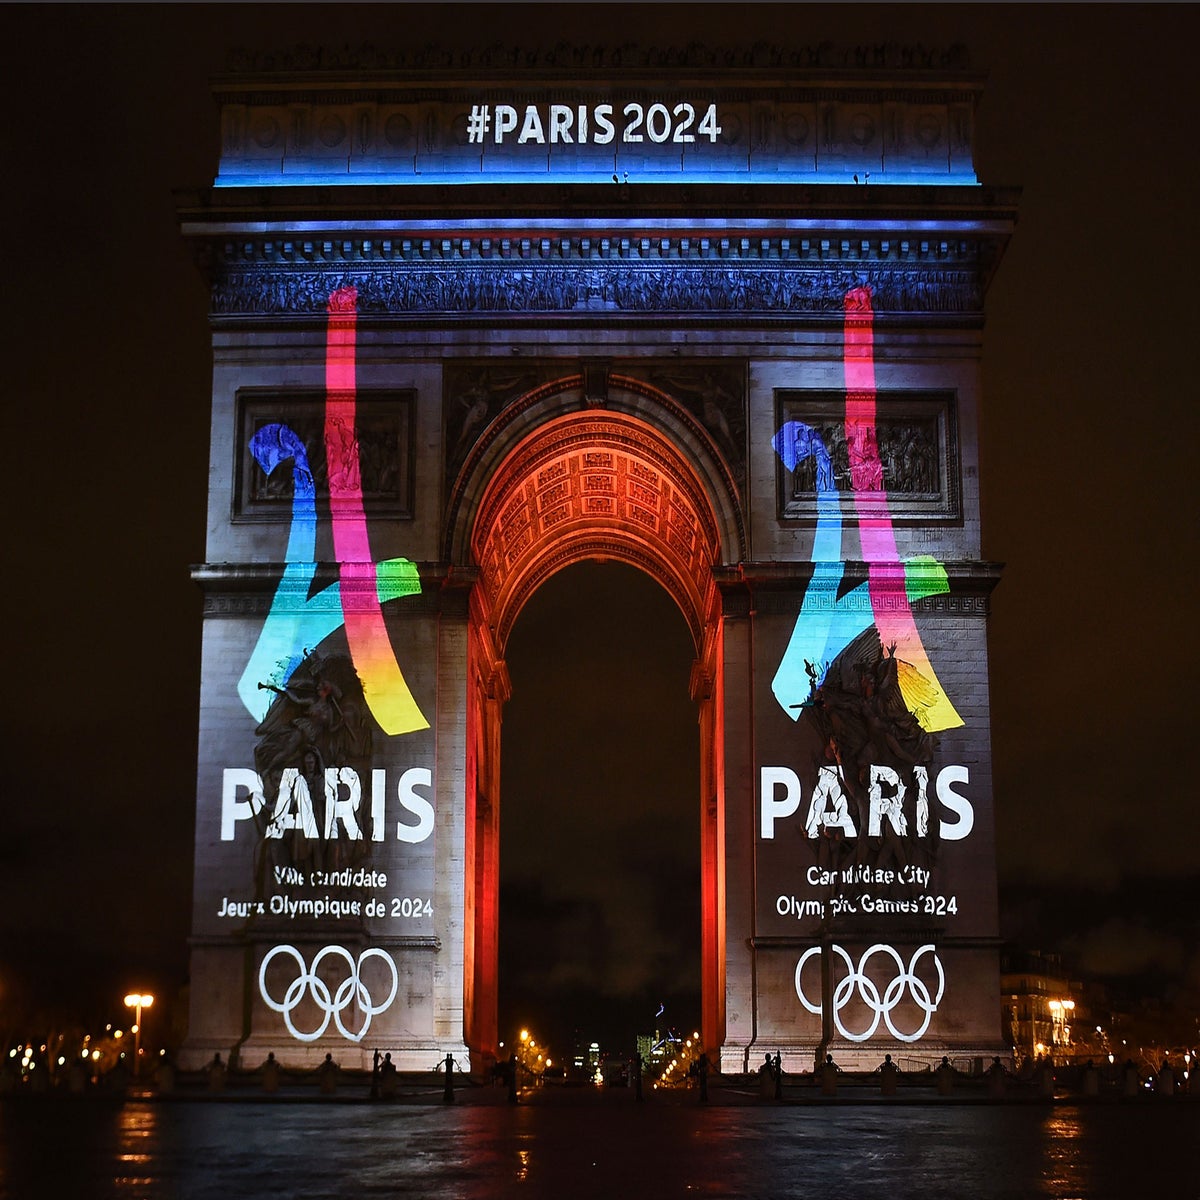 Paris 2024 Olympic Committee accused of plagiarising logo from British  consulting agency, The Independent